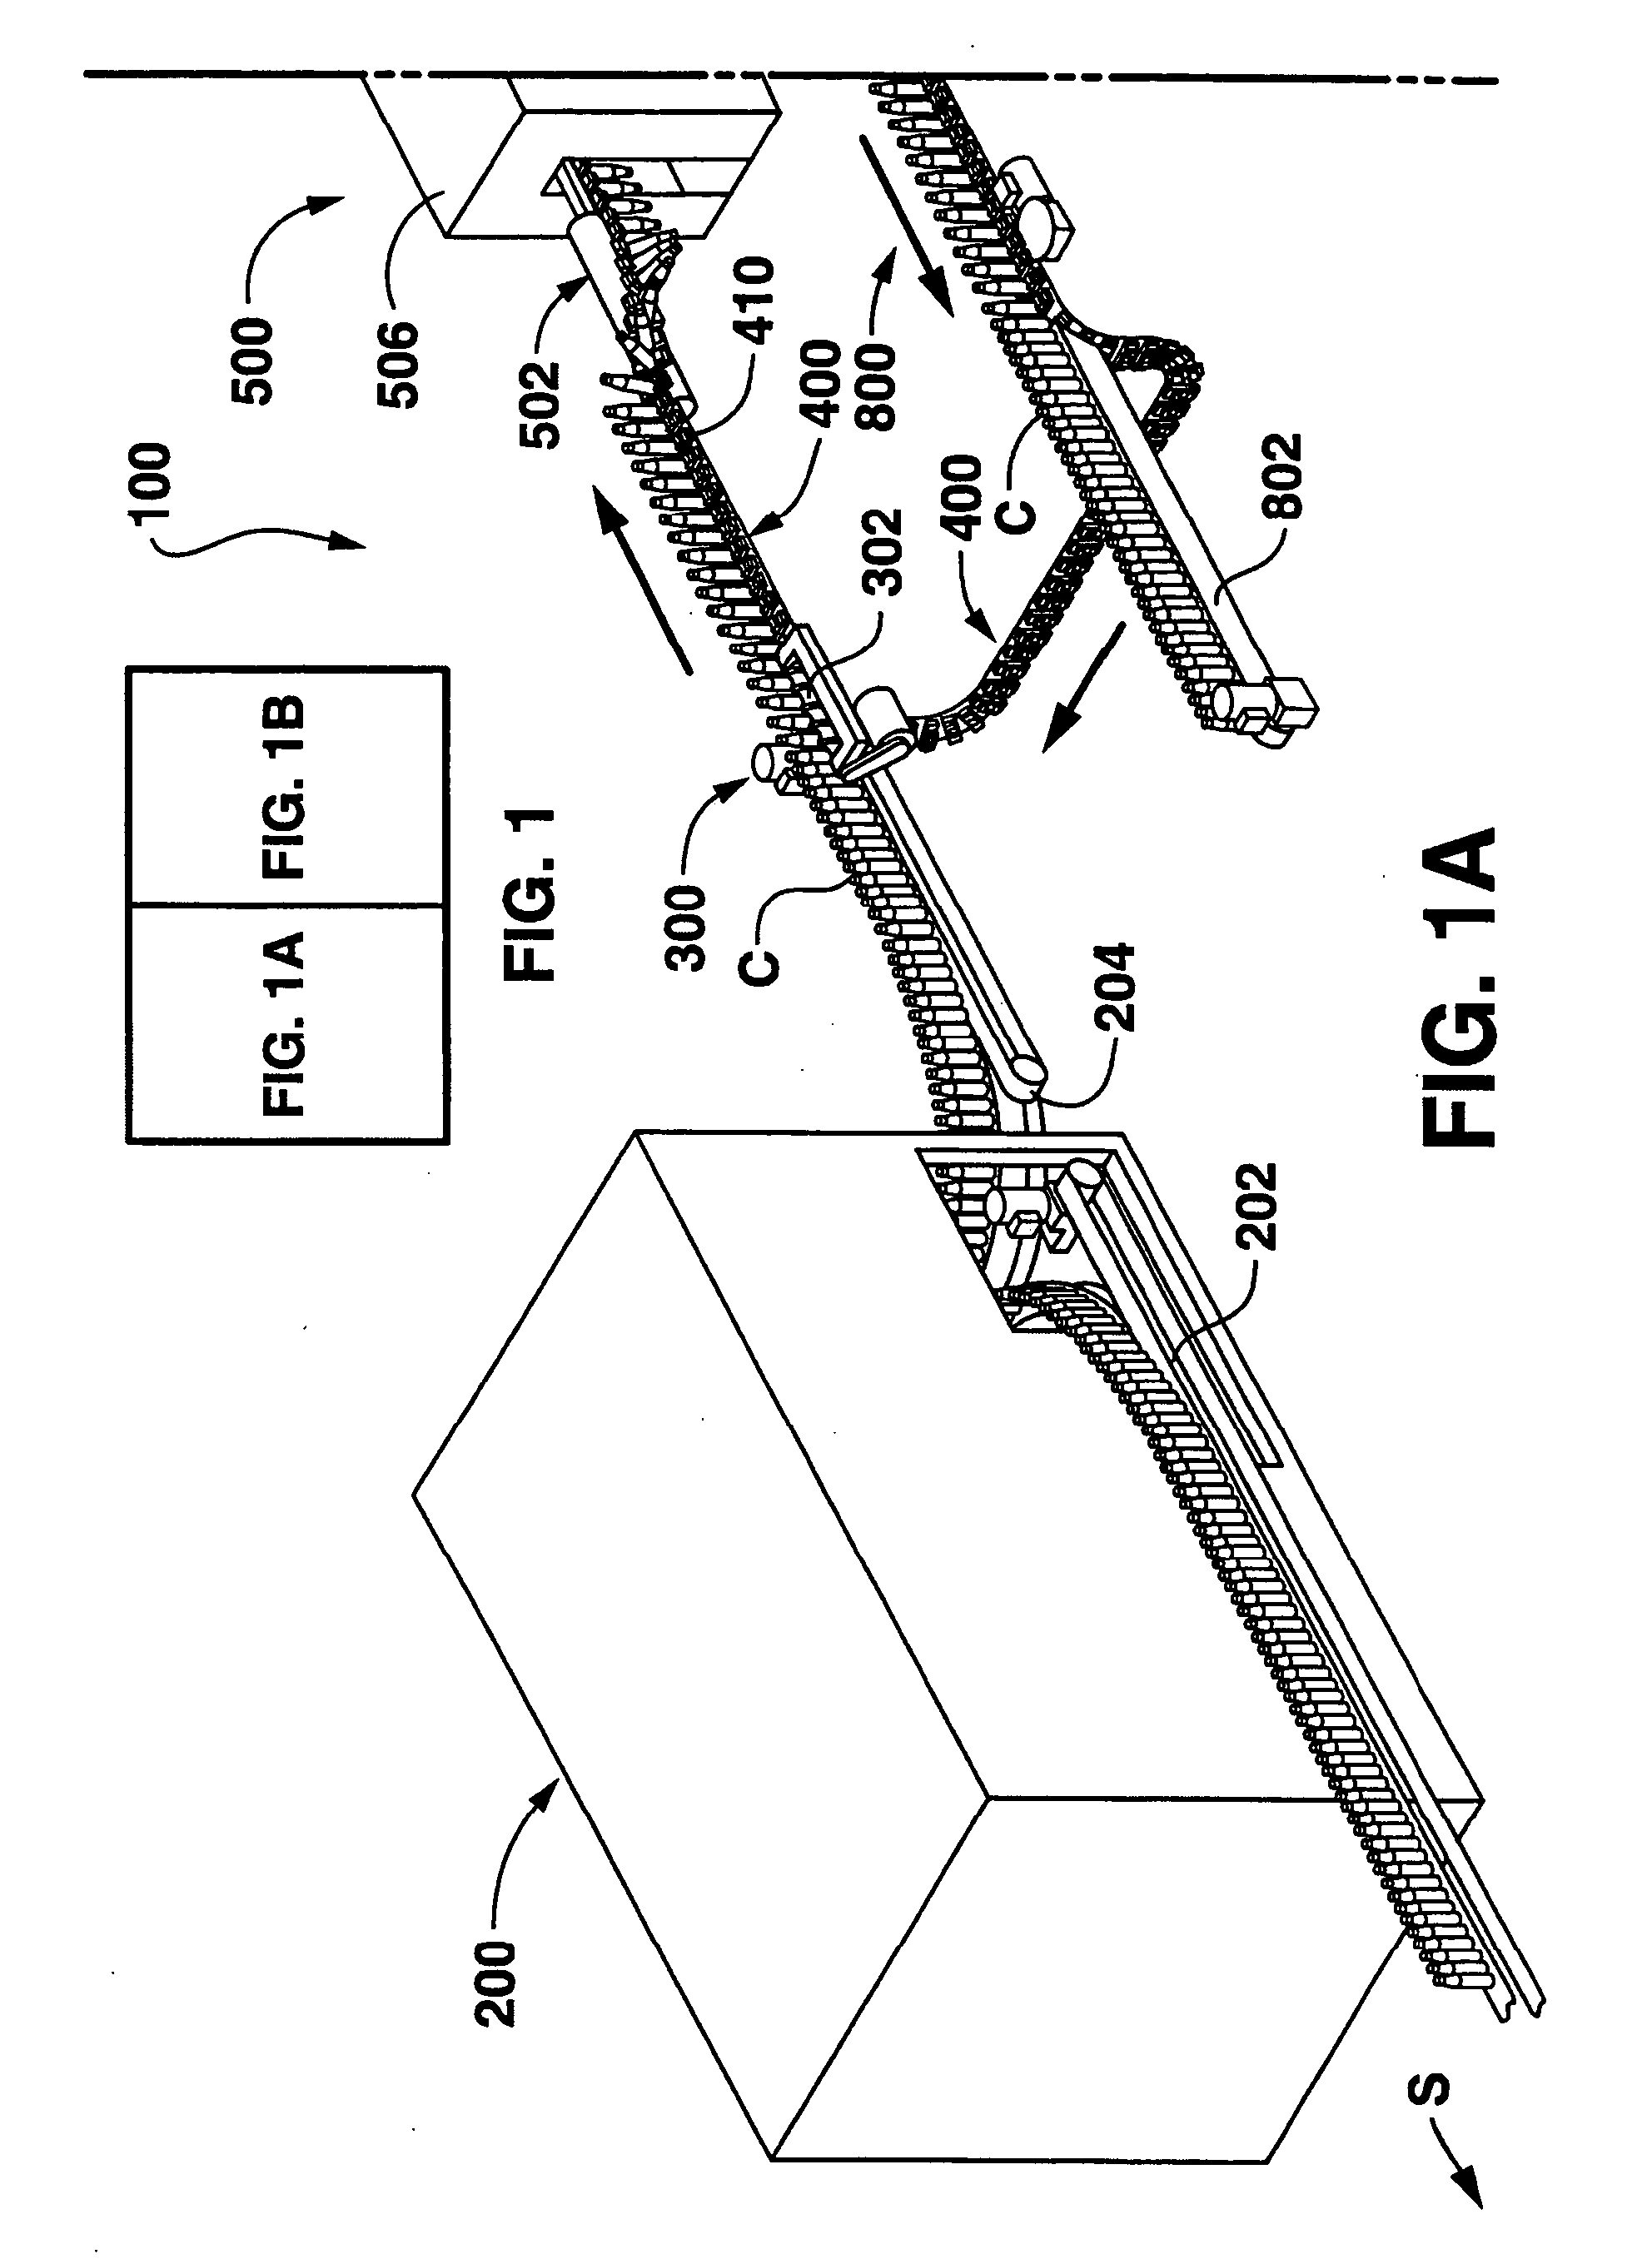 Neck gripping conveyor and link, and related rotary filler and system